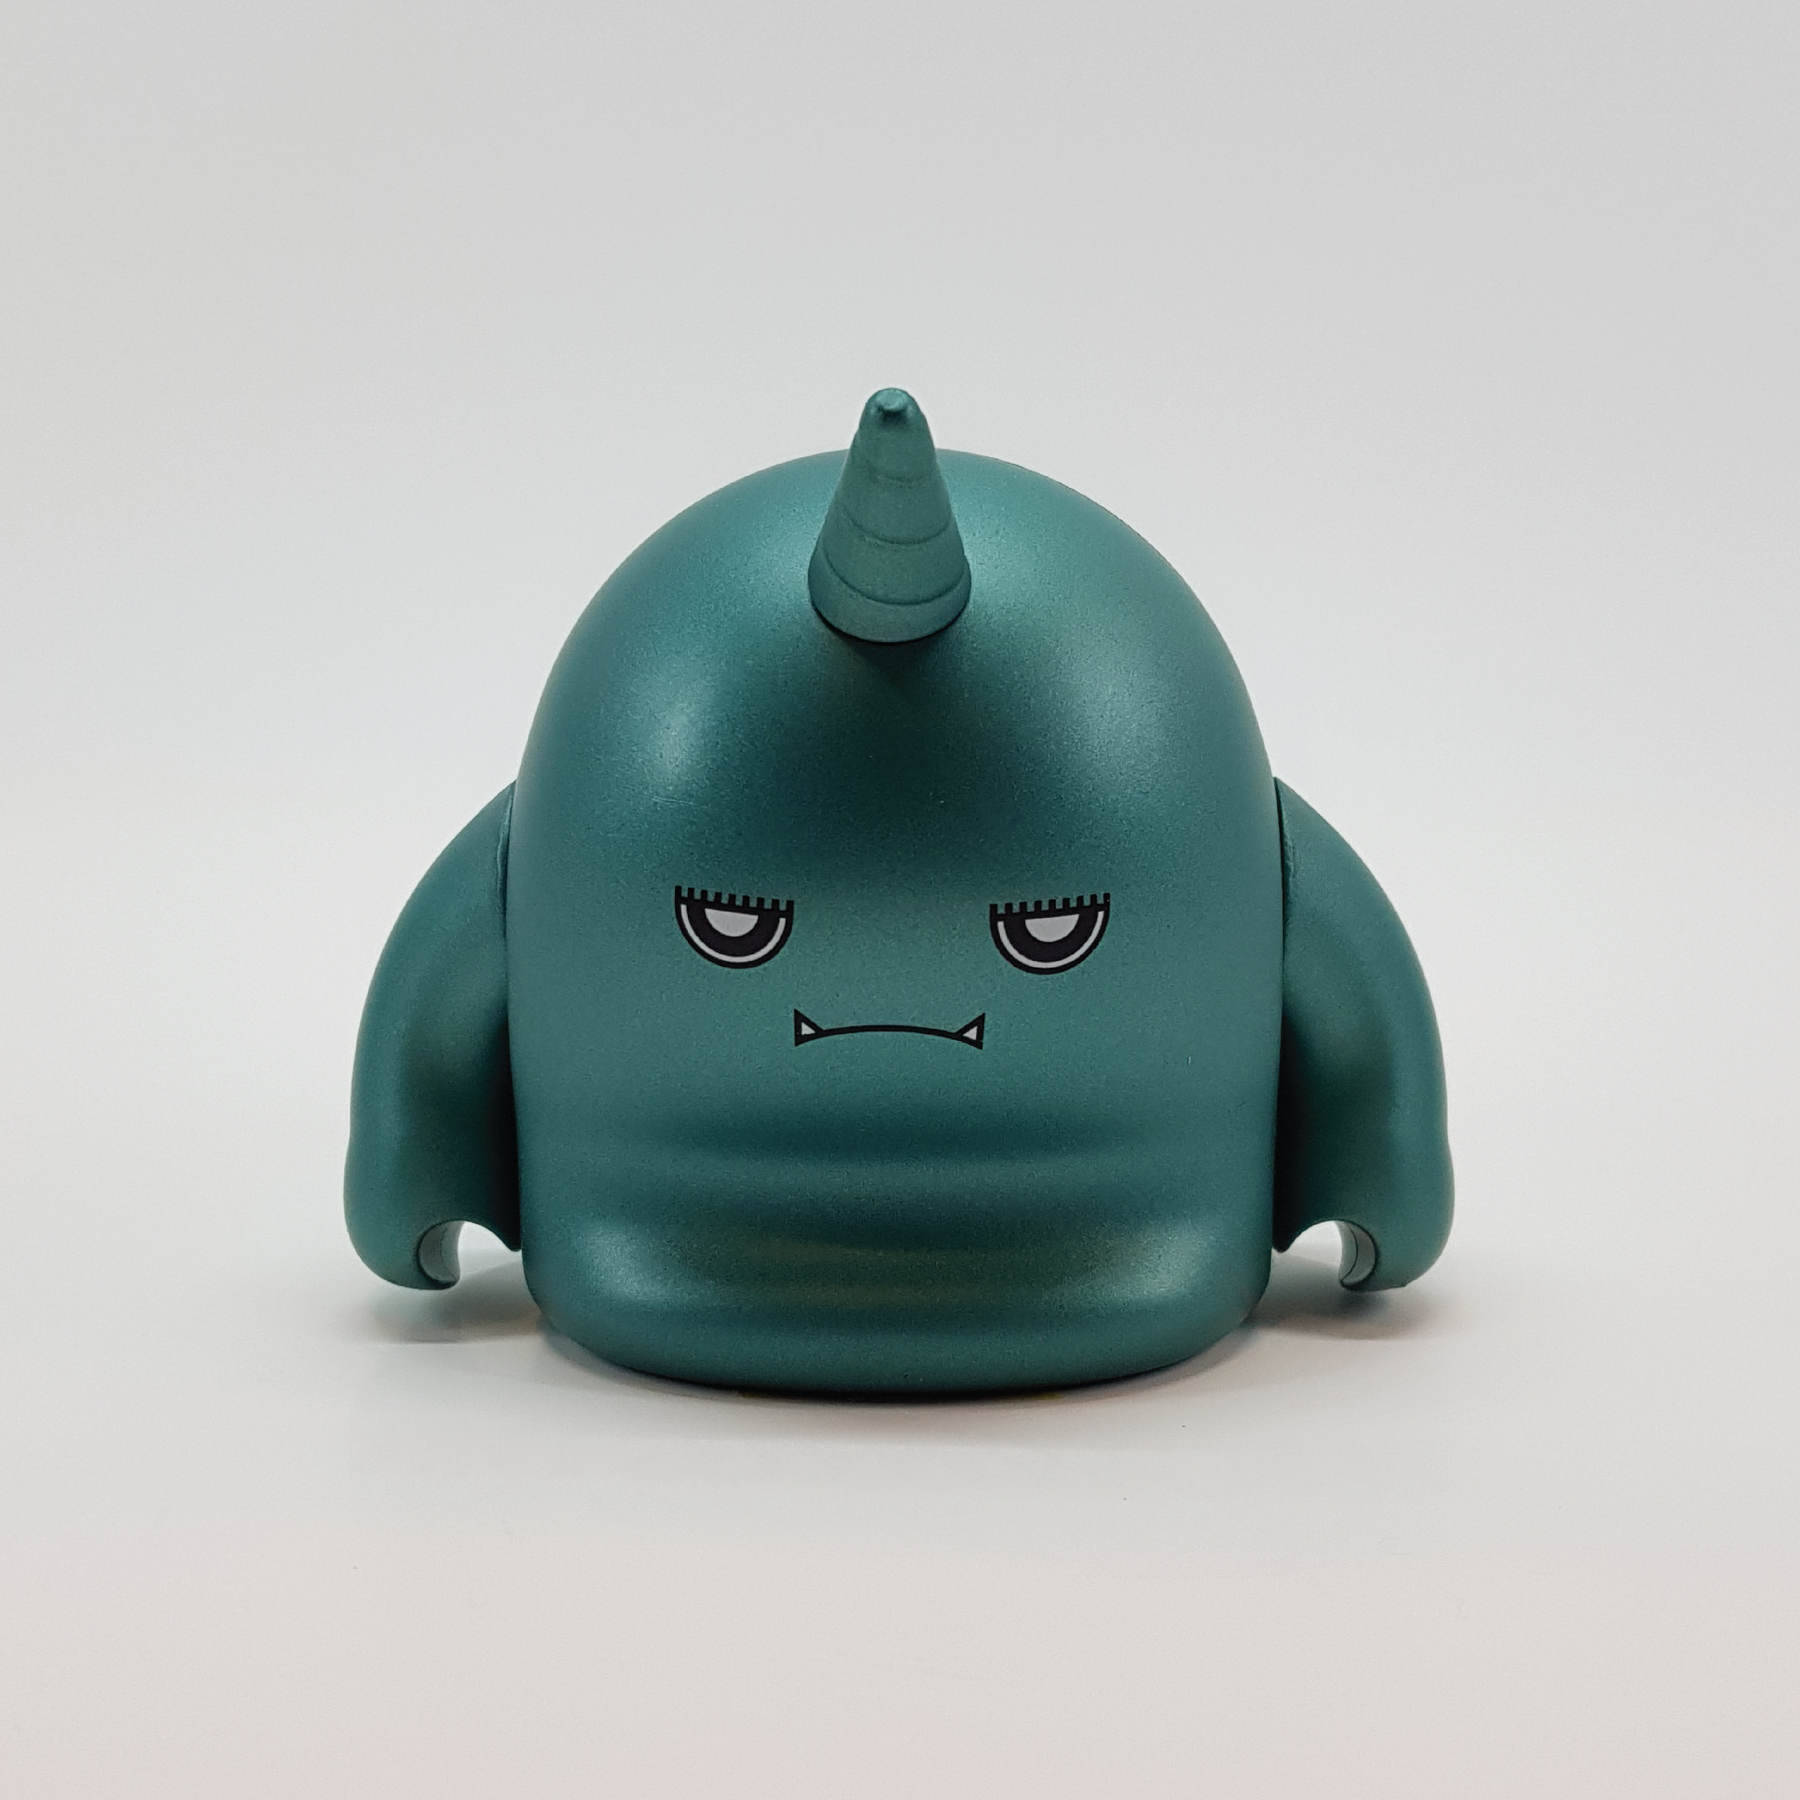 Unisaur Apatite Green 3-inch art toy by C-Concept Studio Available Now ! ! !